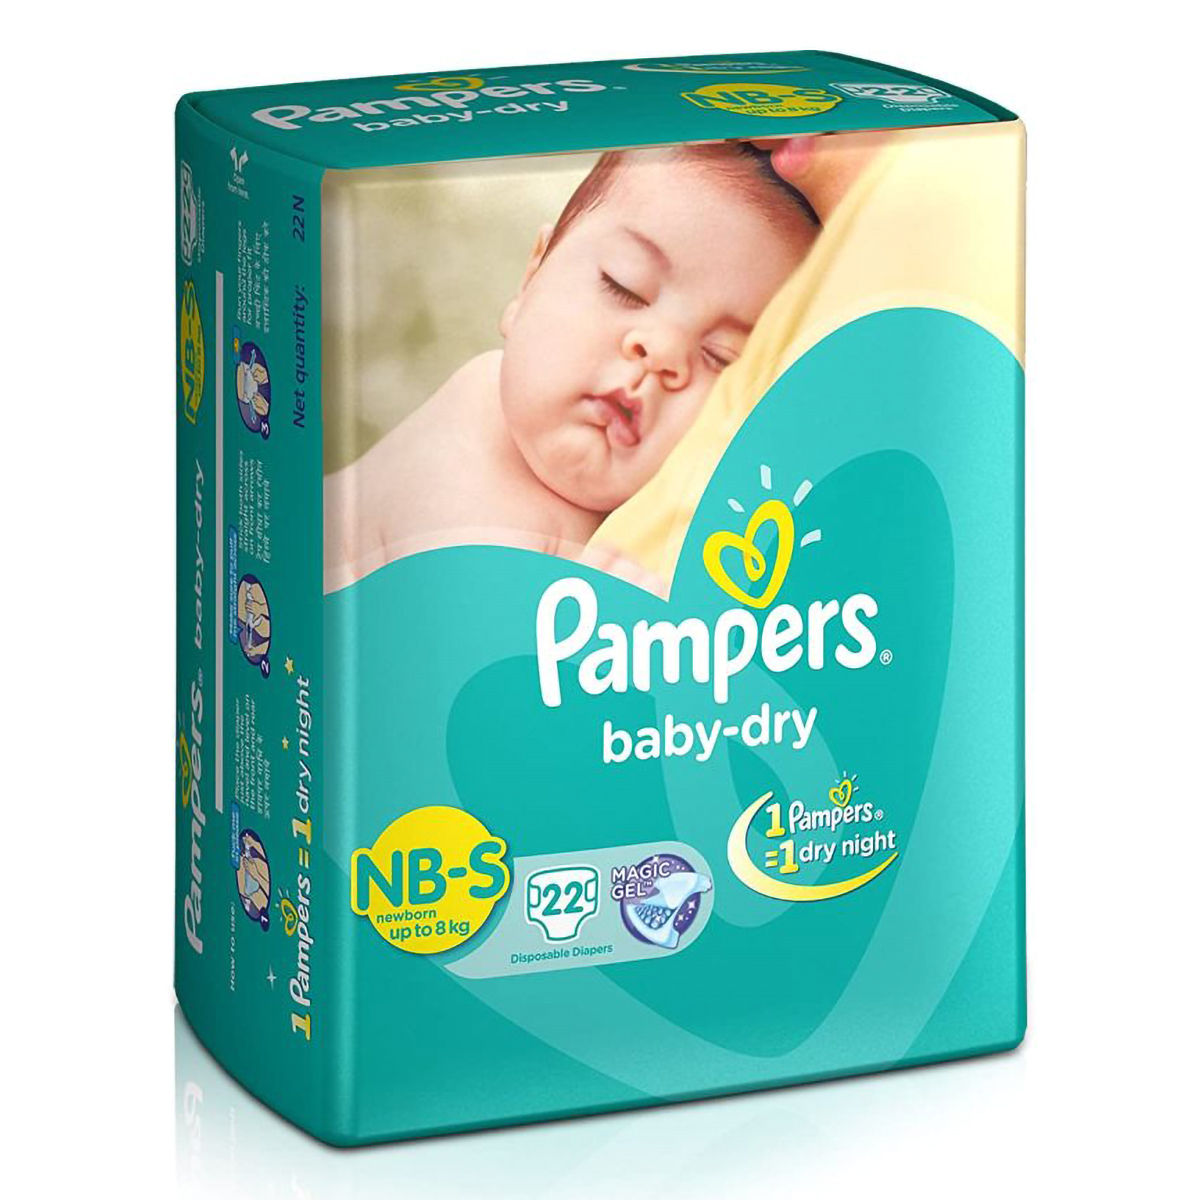 Buy Pampers Dry Pants Small 8 Pcs Online At Best Price of Rs 8910   bigbasket